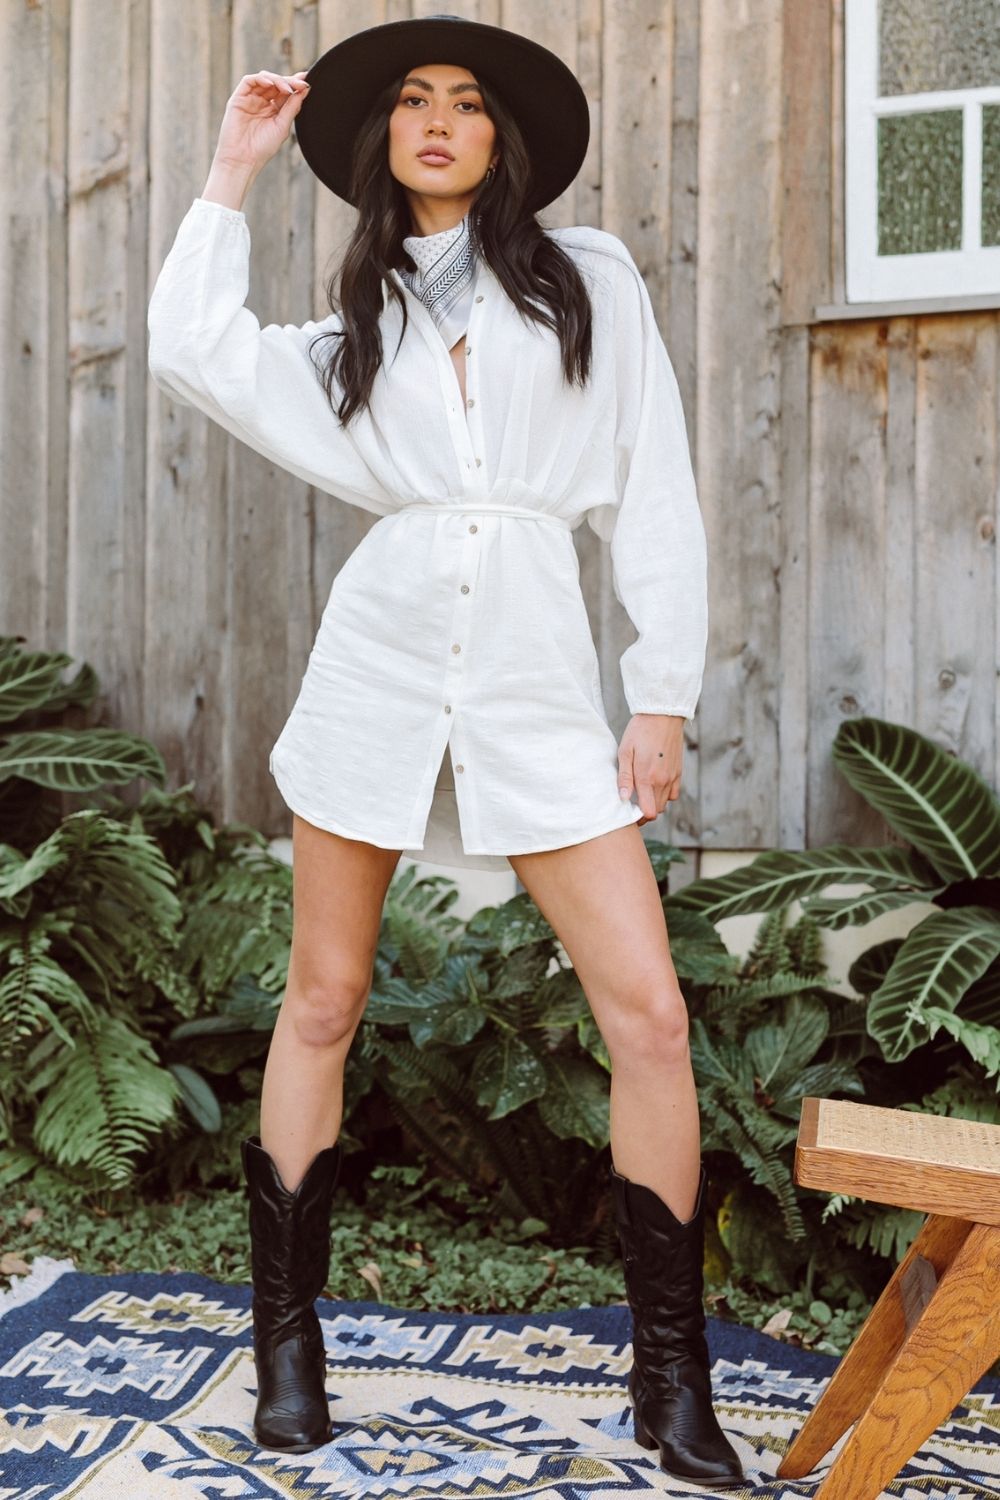 Shirt Dress In White – Styched Fashion